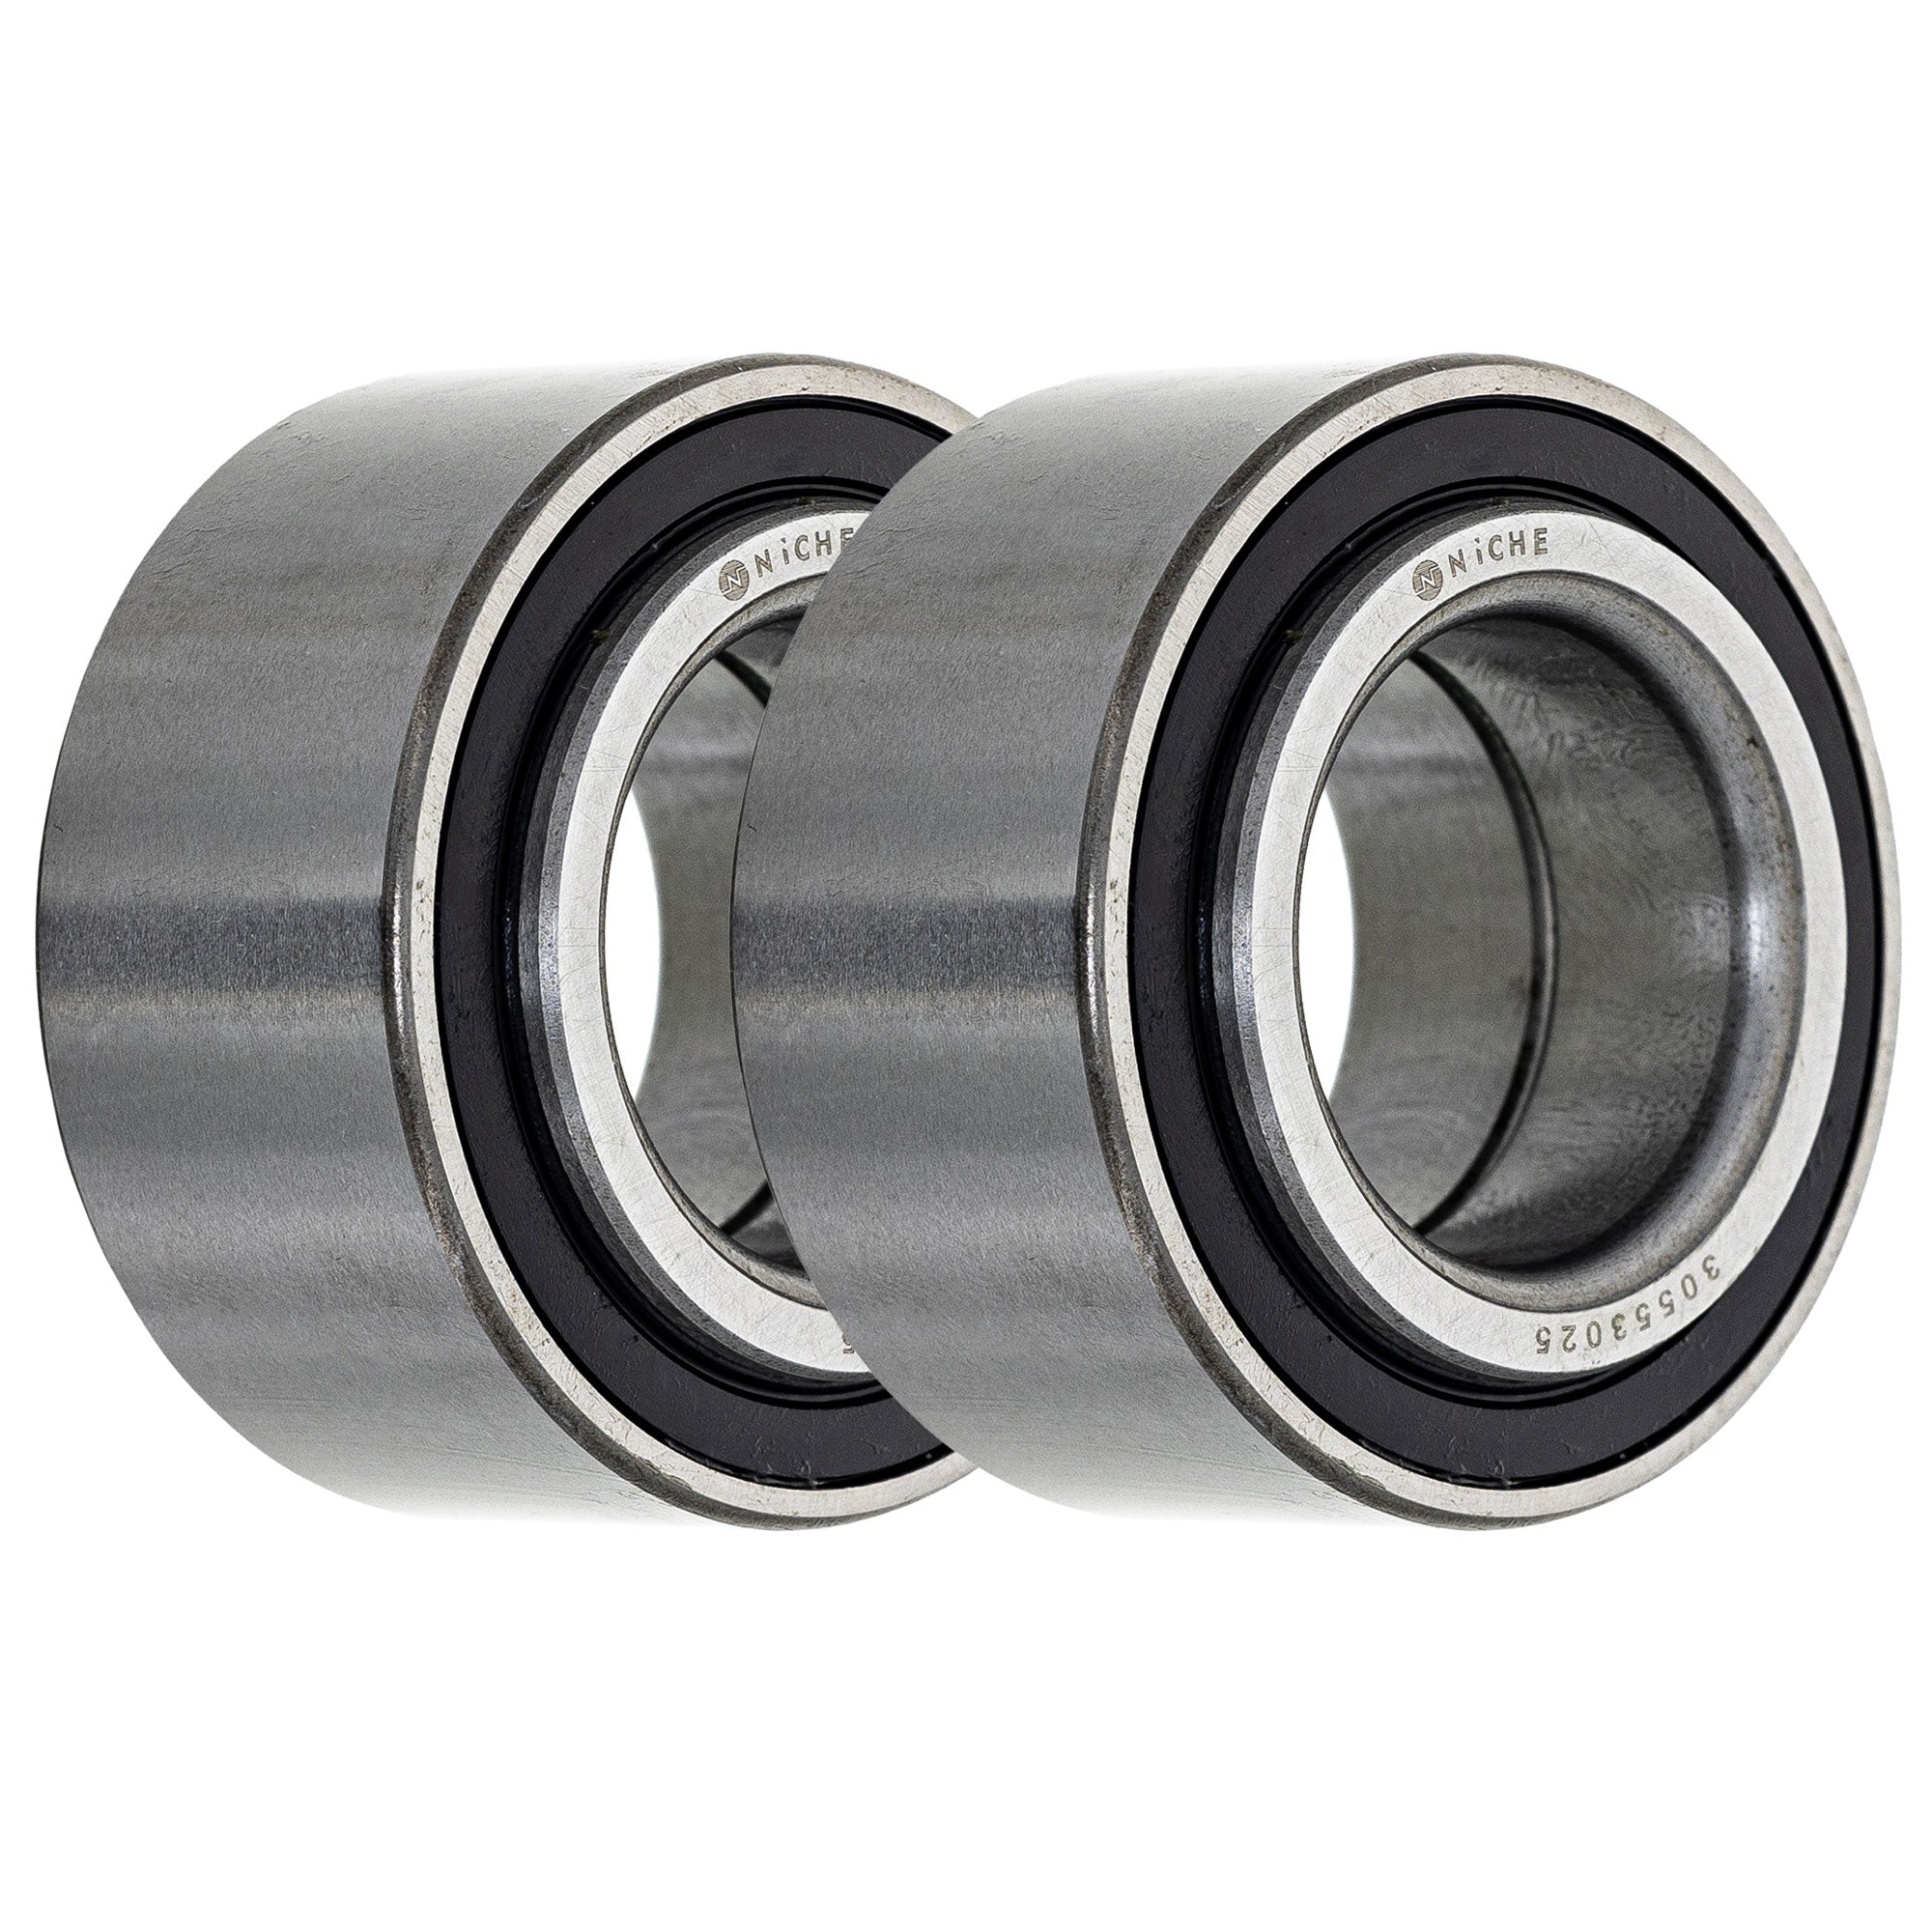 Ball Bearing Pack of 2 2-Pack for zOTHER Renegade Outlander Hauler NICHE 519-CBB2263R